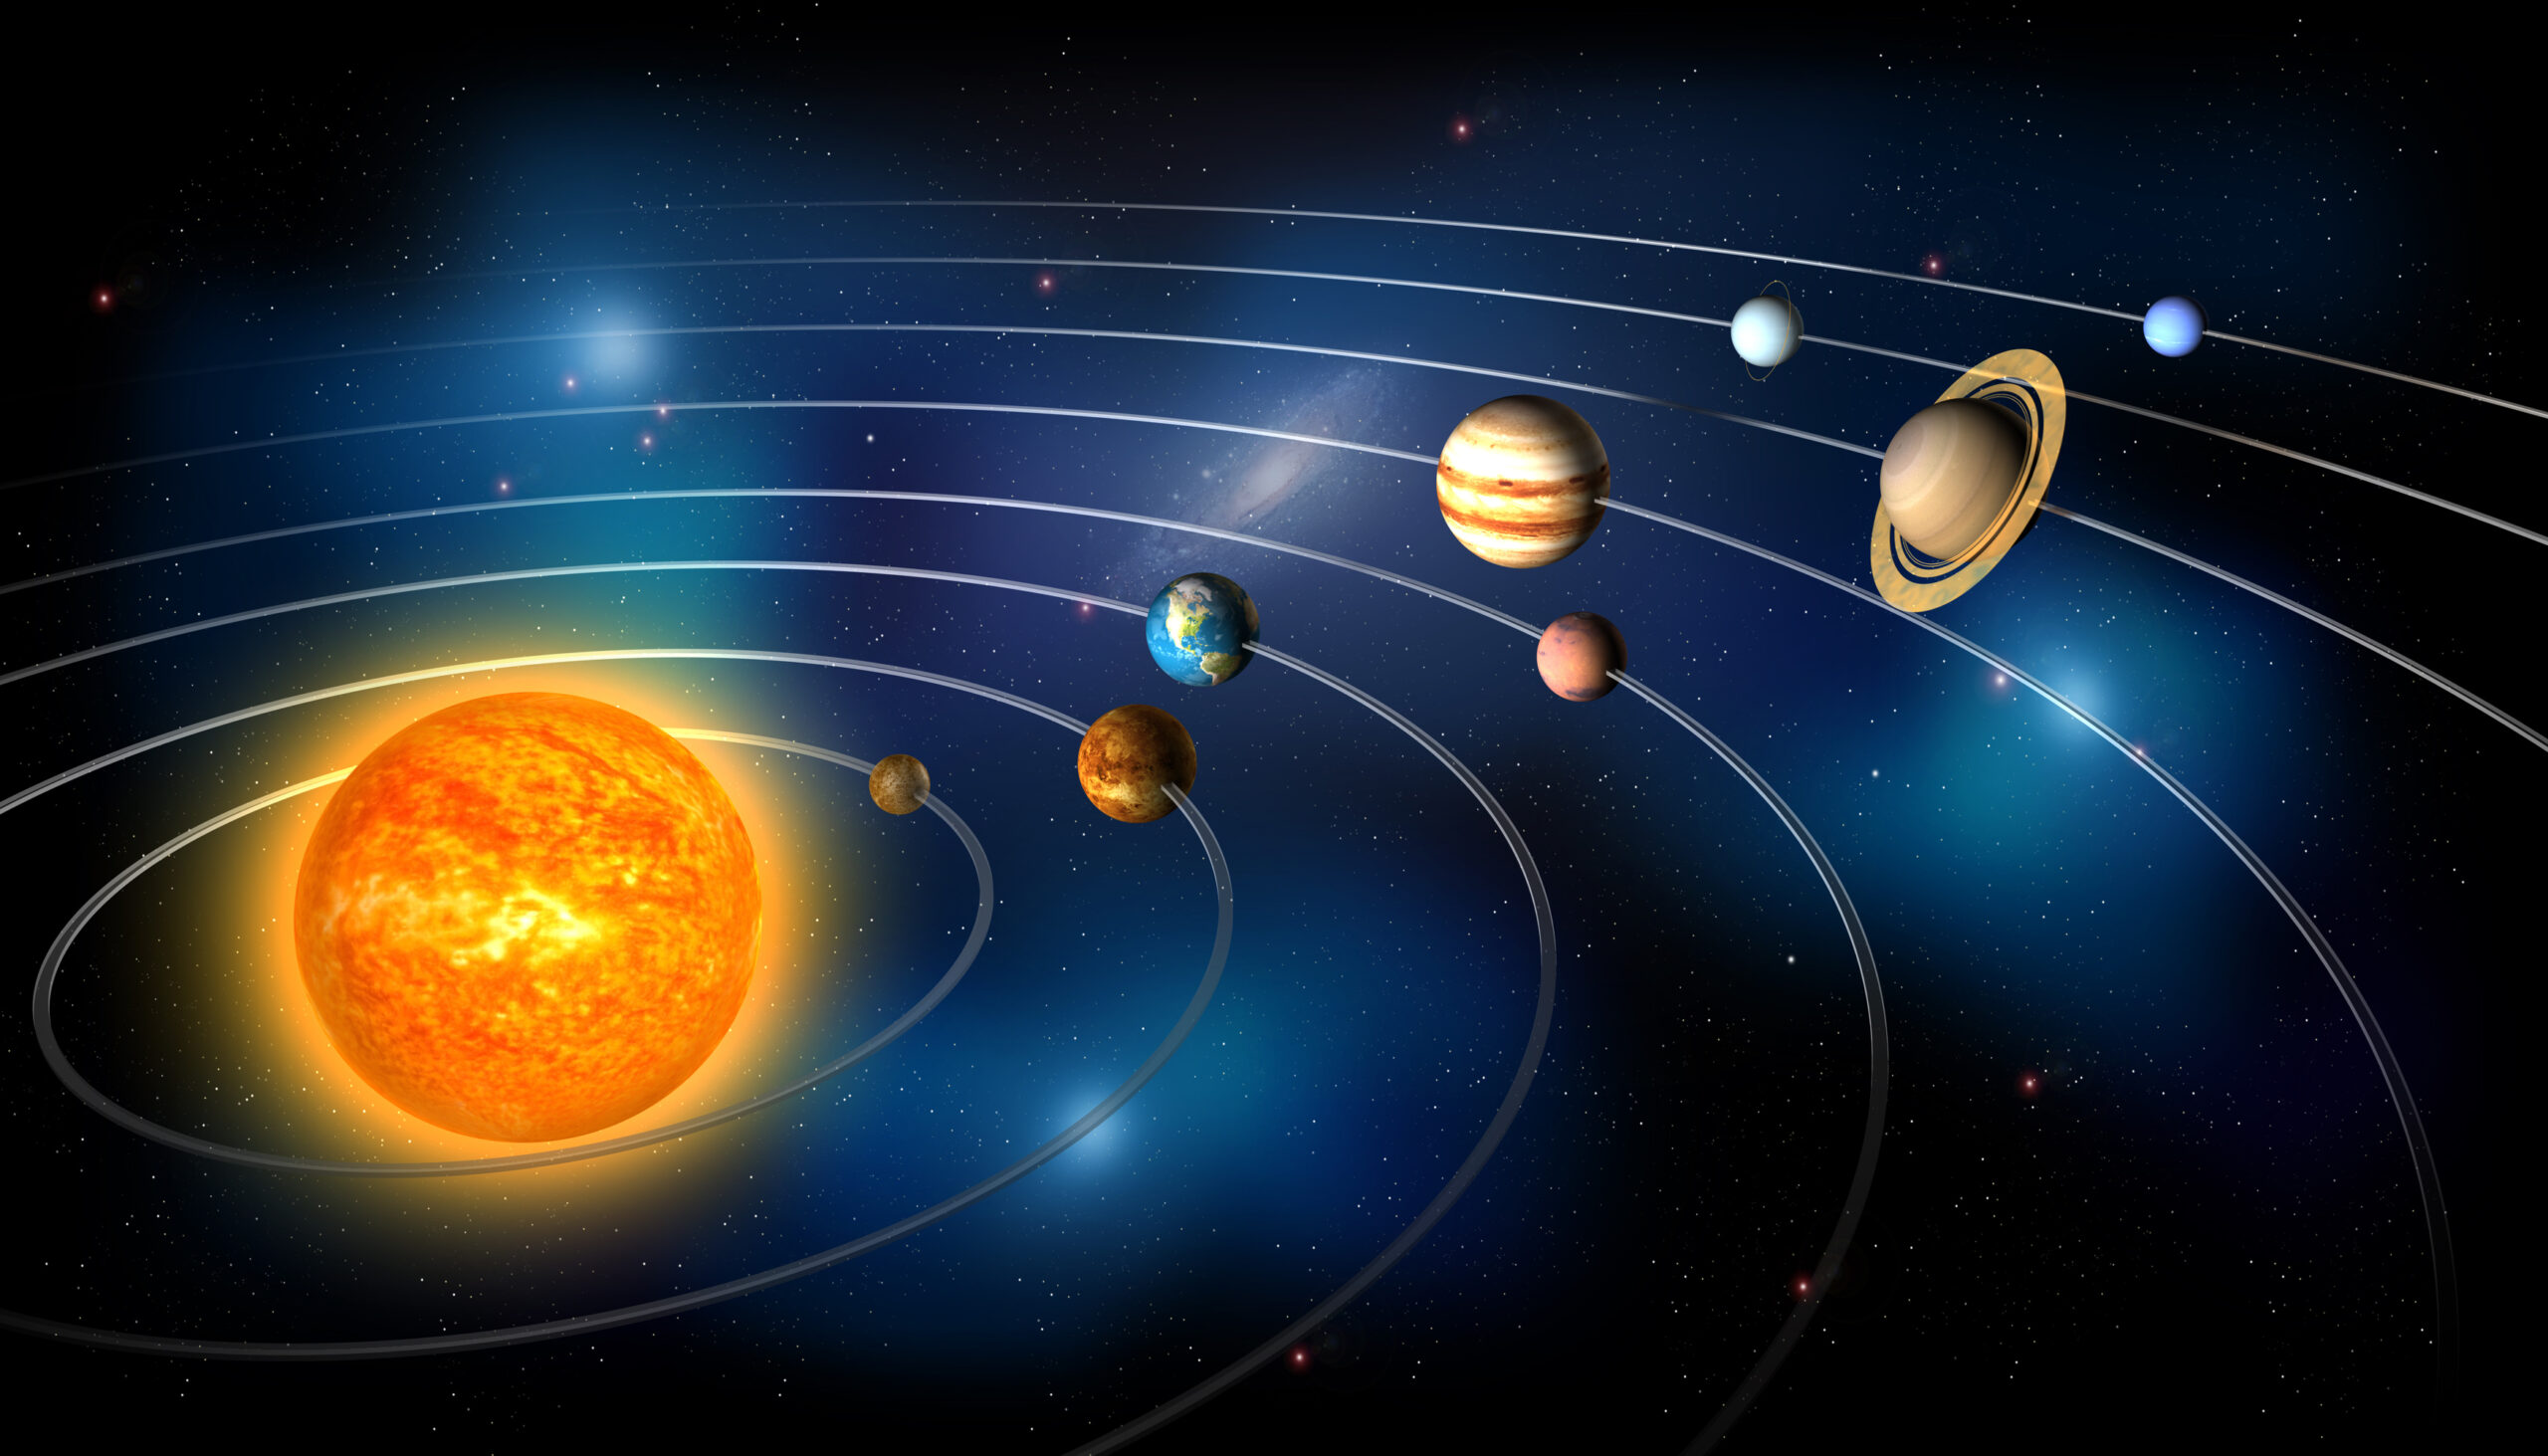 A graphic image of our Solar System, featuring each of the different planets orbiting the sun.